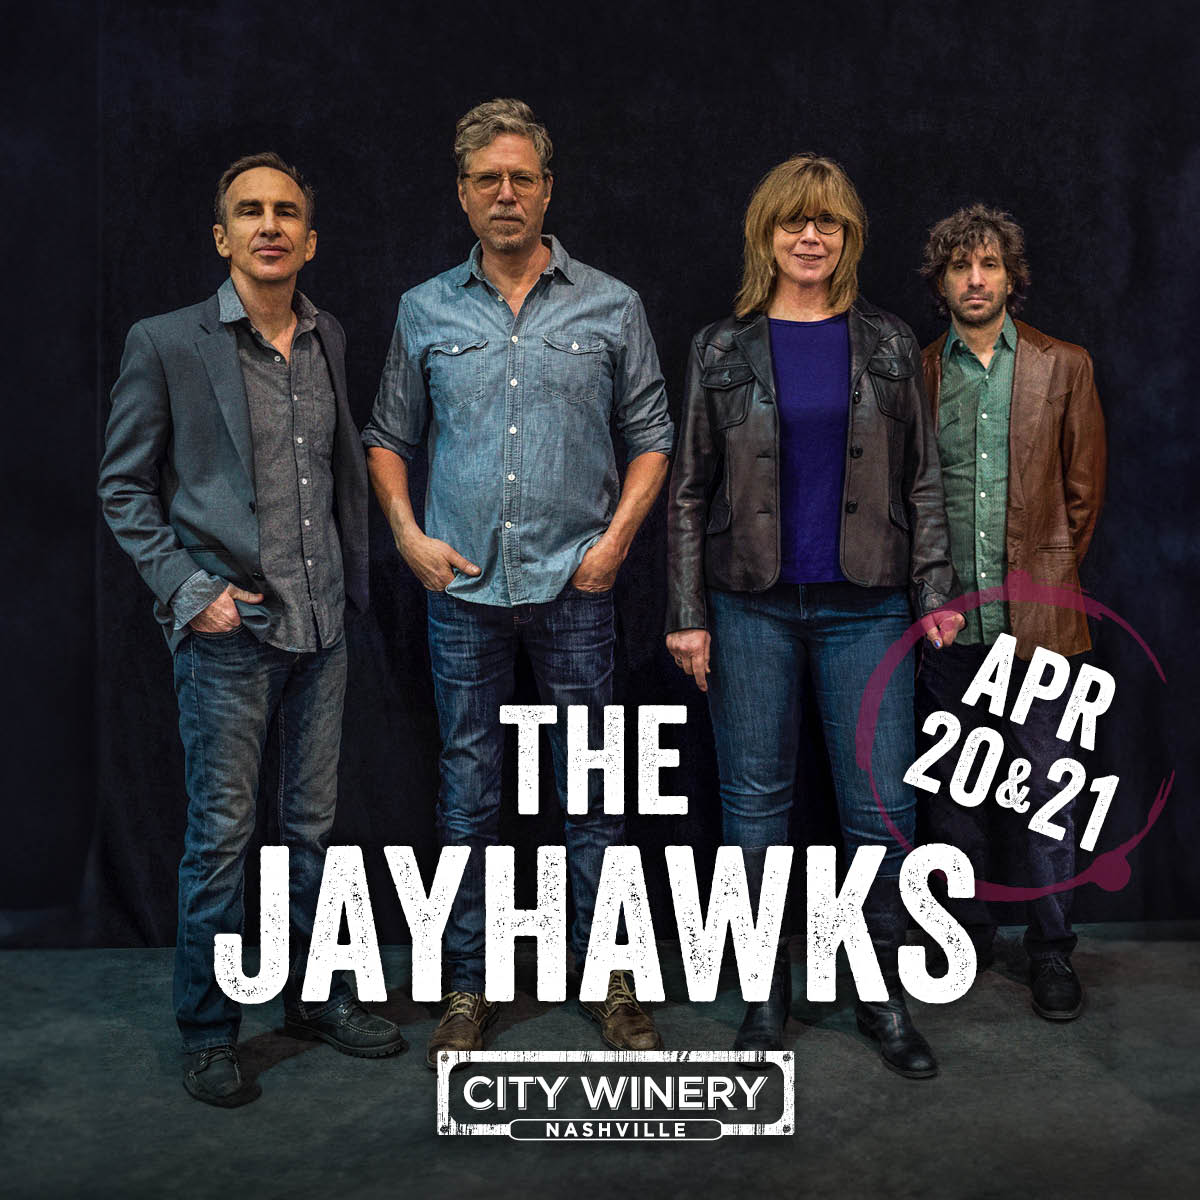 There are a few tickets remaining for our show on Sunday 4/21 at @CityWineryNSH. @iamjoshrouse will be opening. Reminder: our old friend & bandmate Stephen McCarthy will be joining us for these shows. Tix: bit.ly/3tMrz7Q Jayhawks tour dates: bit.ly/JayhawksShows